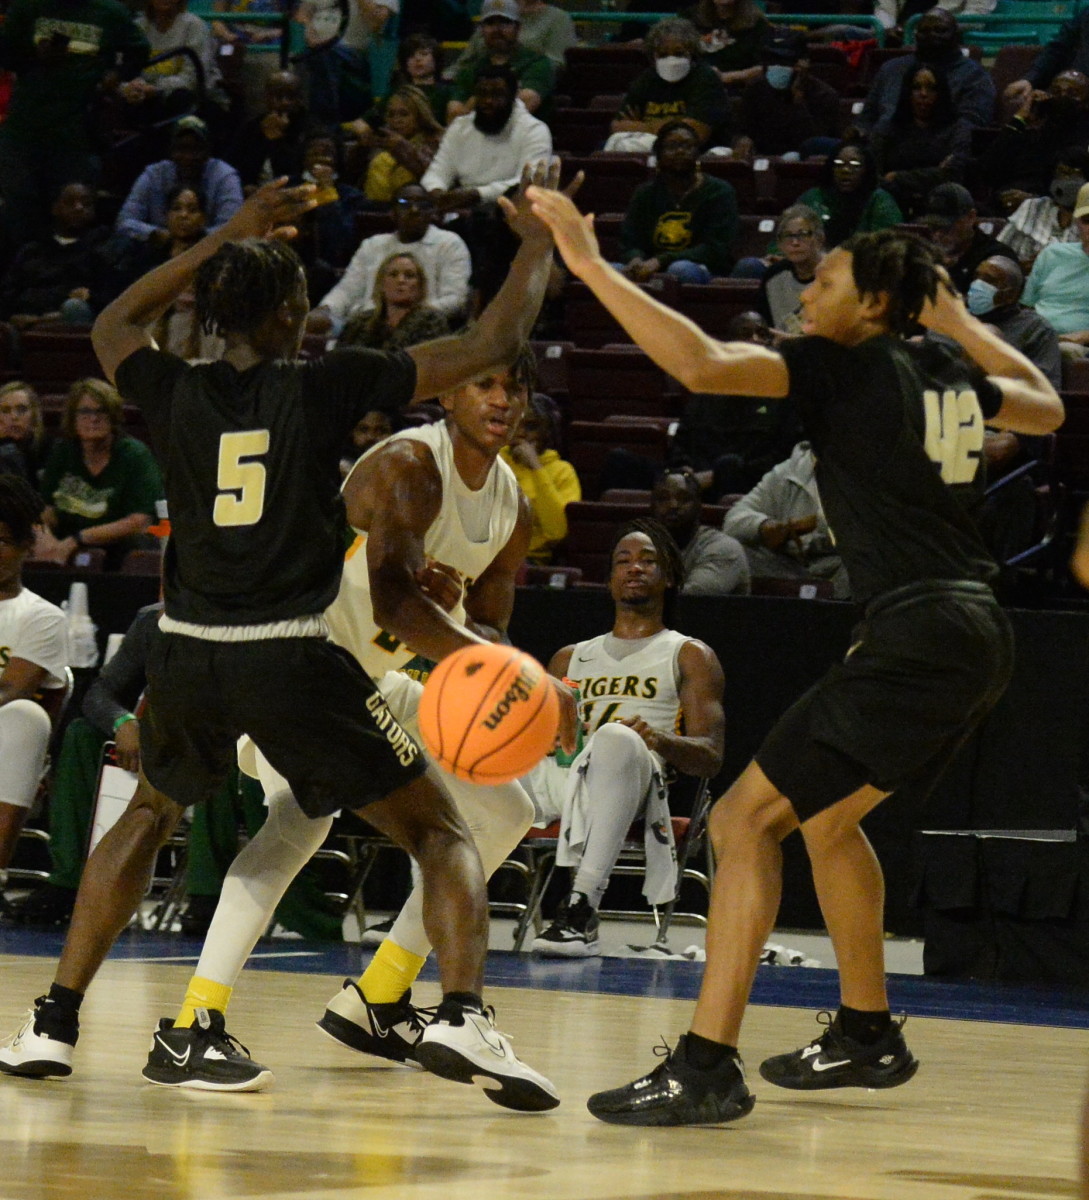 Conway's Cam Alston passes out of a double team, but his team struggled against the defense of Goose Creek all night in the 5-A Lower State championship game, scoring just 23 points.